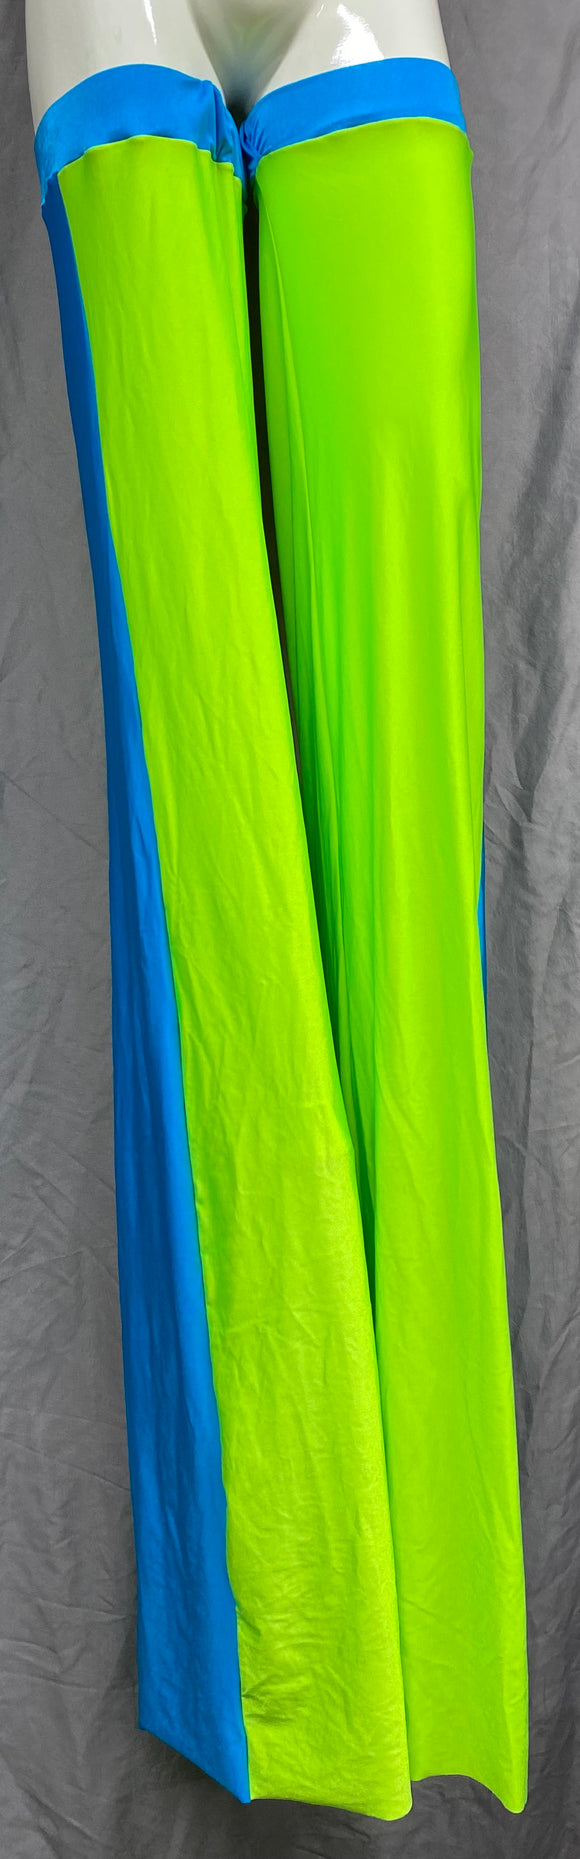 Stilt Covers - Neon Green with Blue 55.5